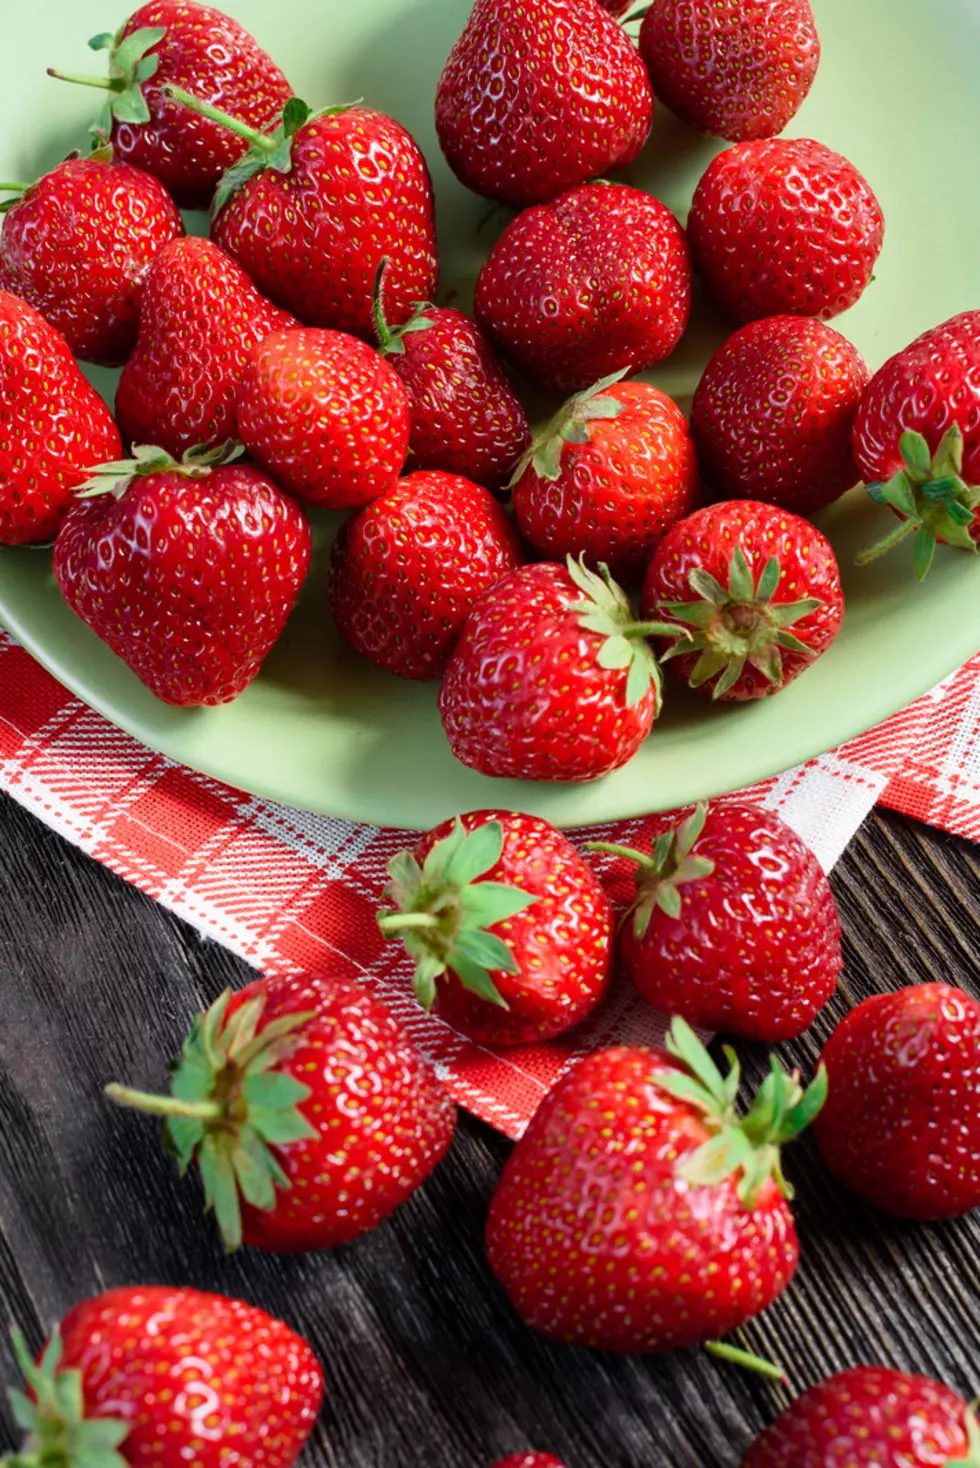 This Small Town in Oklahoma is the Strawberry Capital of the World